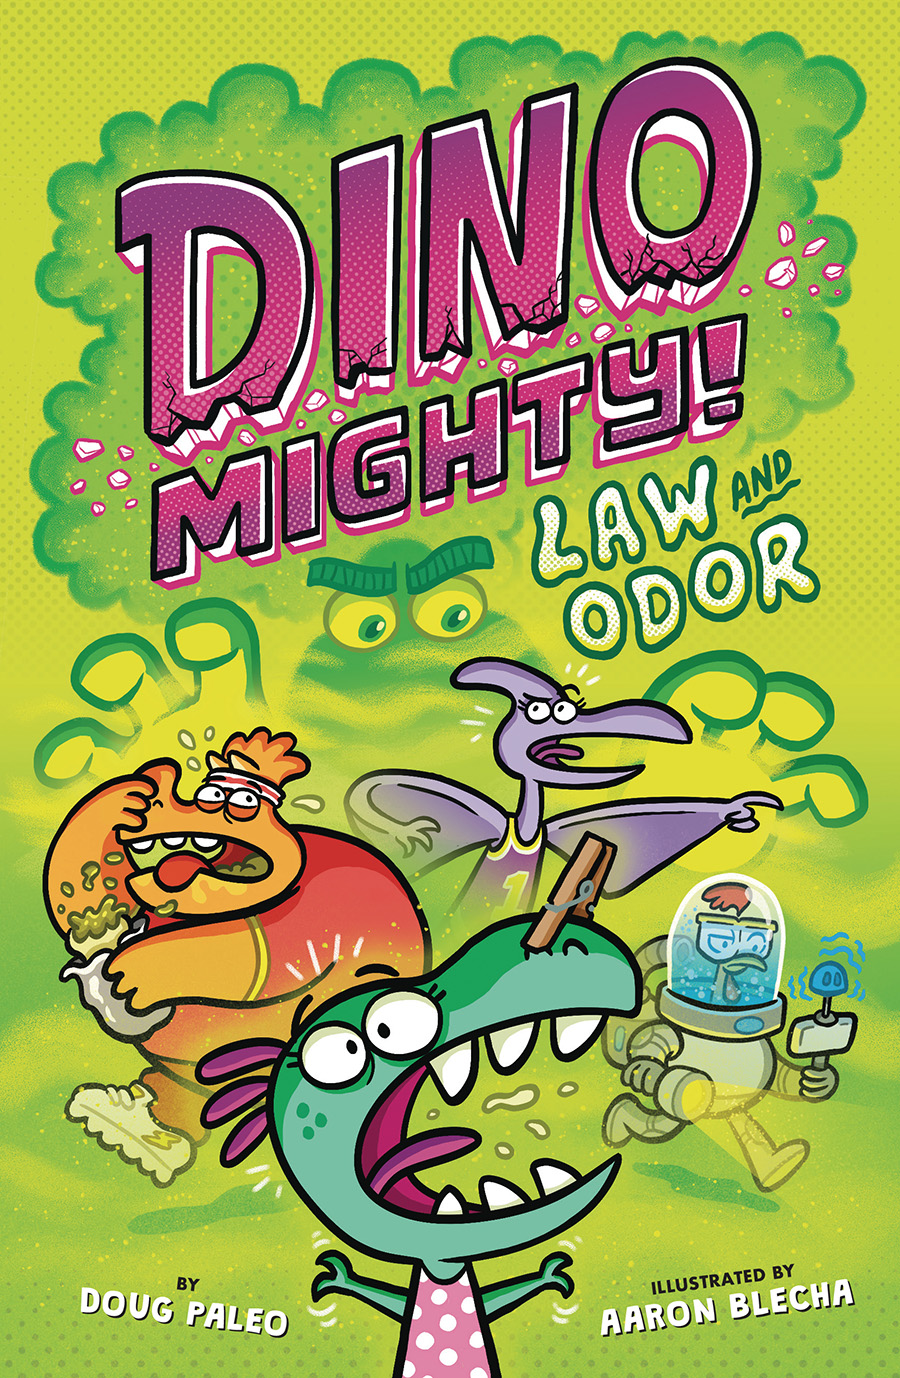 Dino Mighty Vol 2 Law And Odor GN